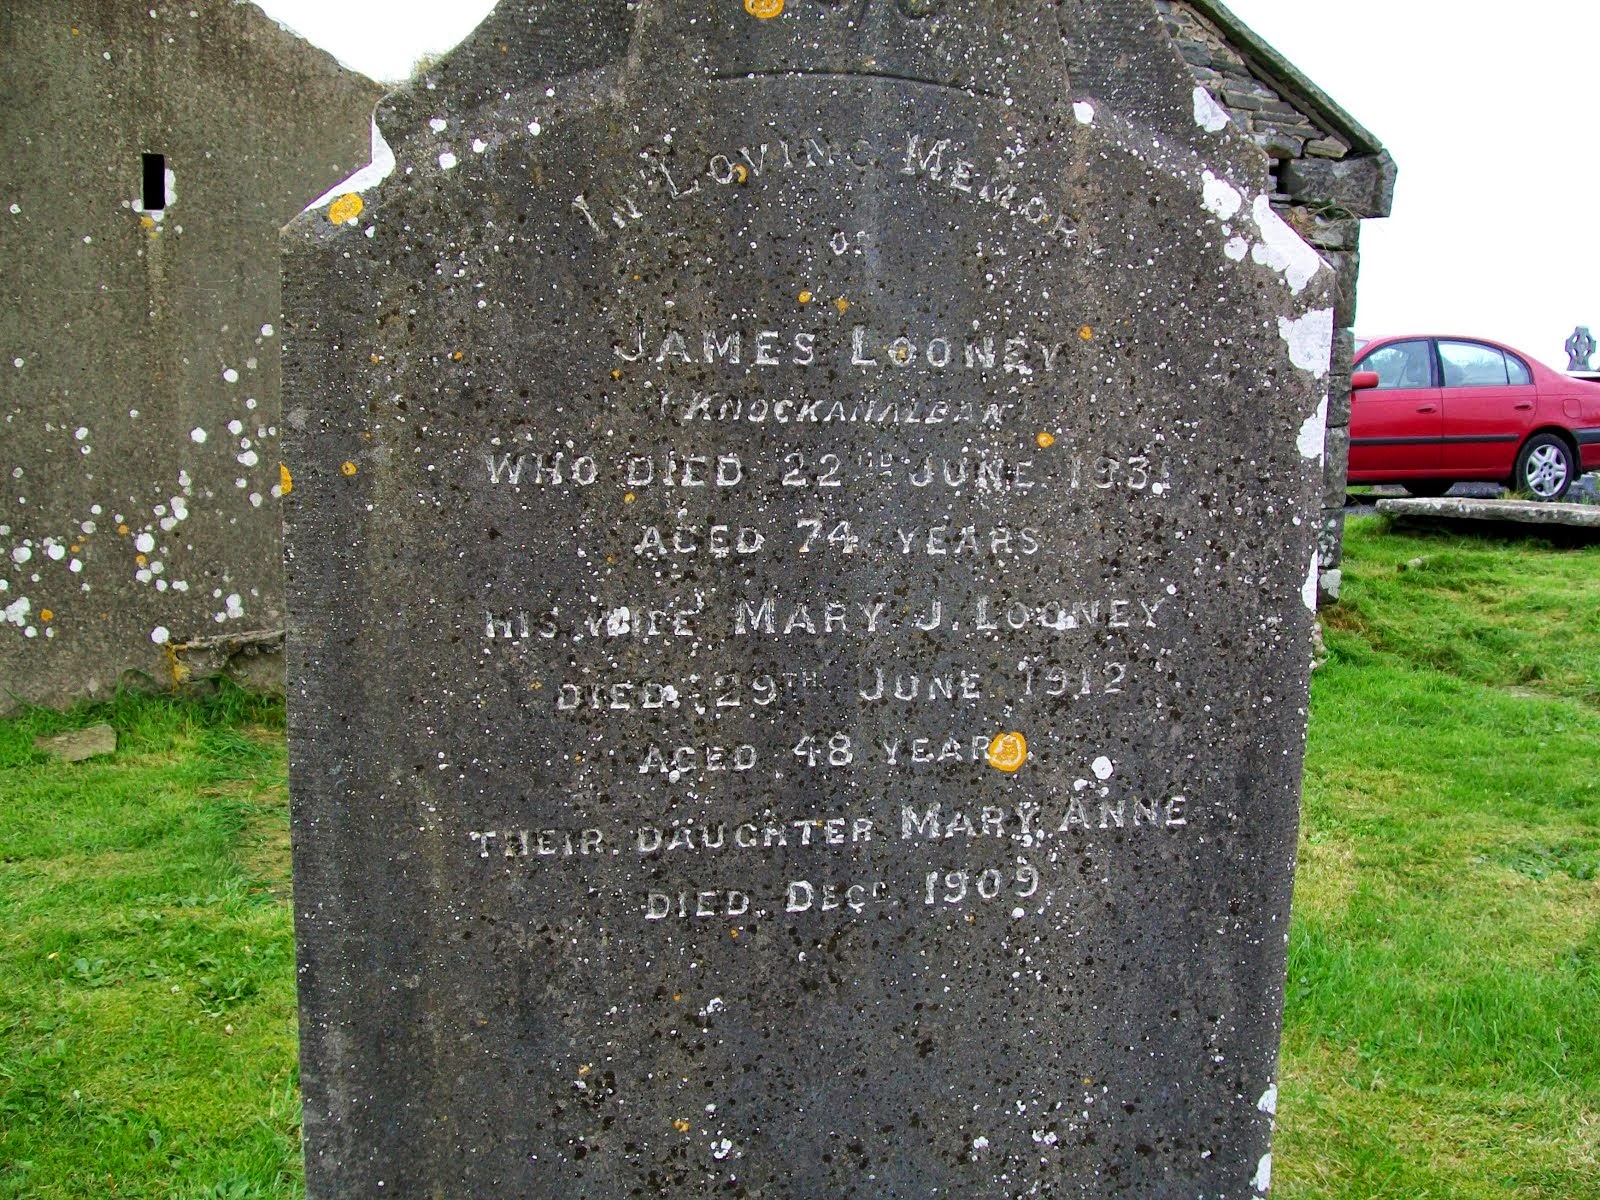 GRAVE OF JAMES LOONEY